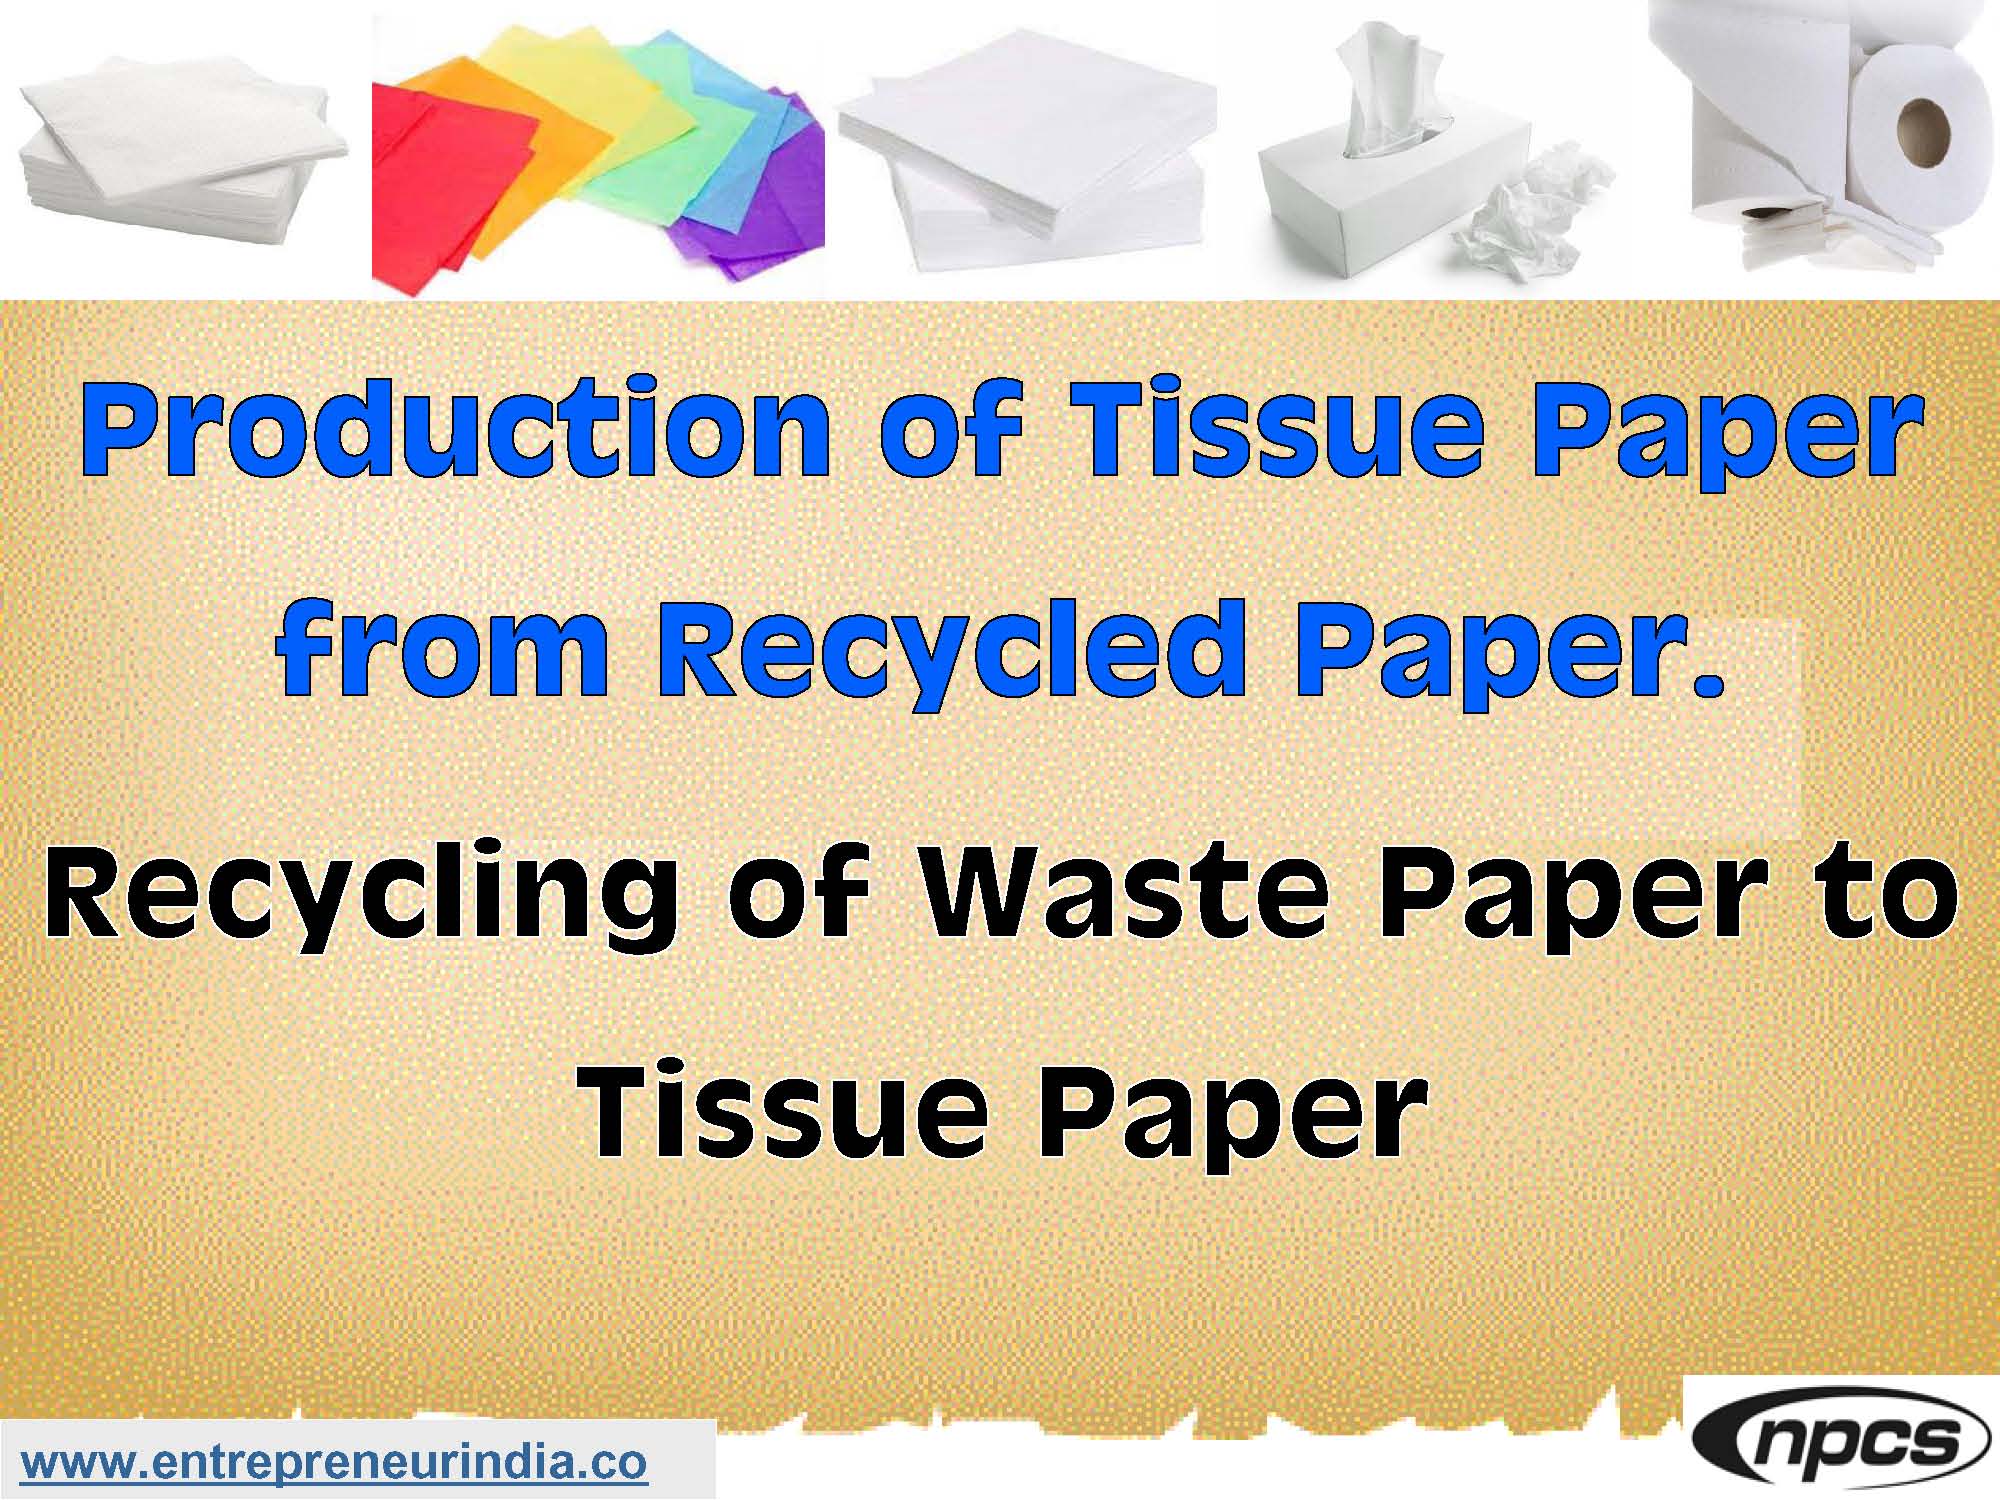 Production of Tissue Paper from Recycled Paper